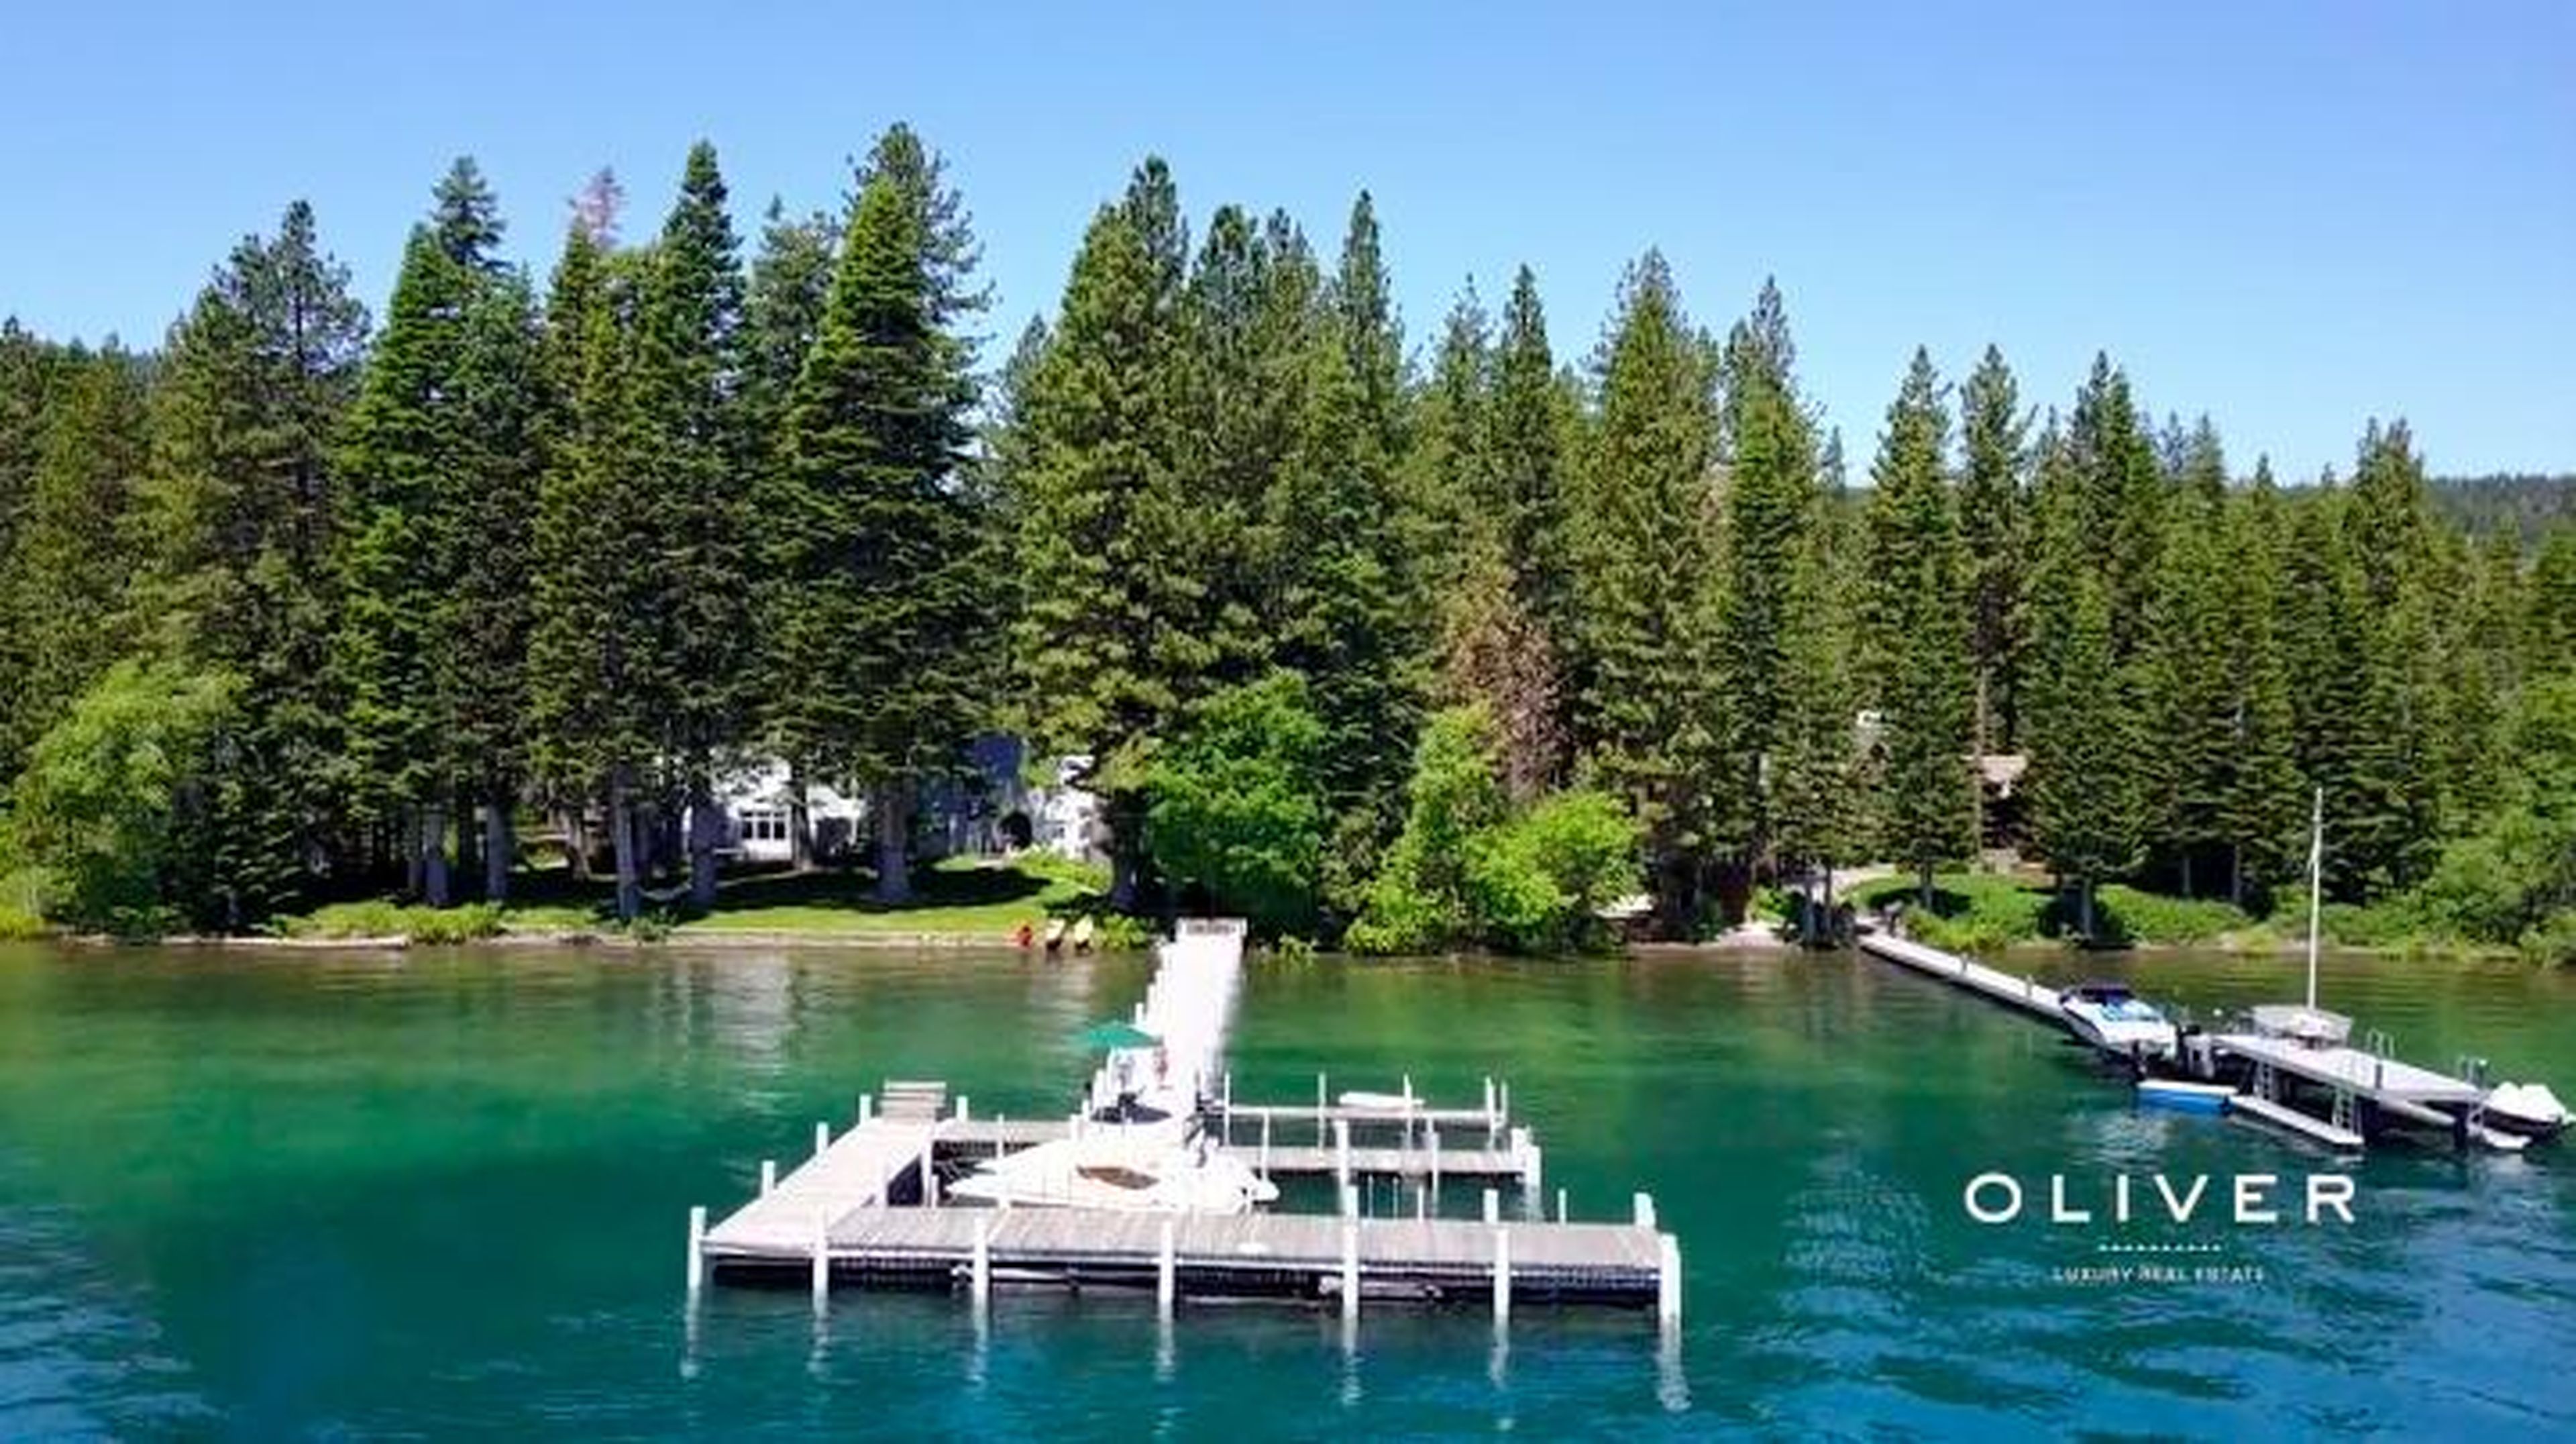 Between the two properties, Zuckerberg owns 600 feet of Lake Tahoe private waterfront.